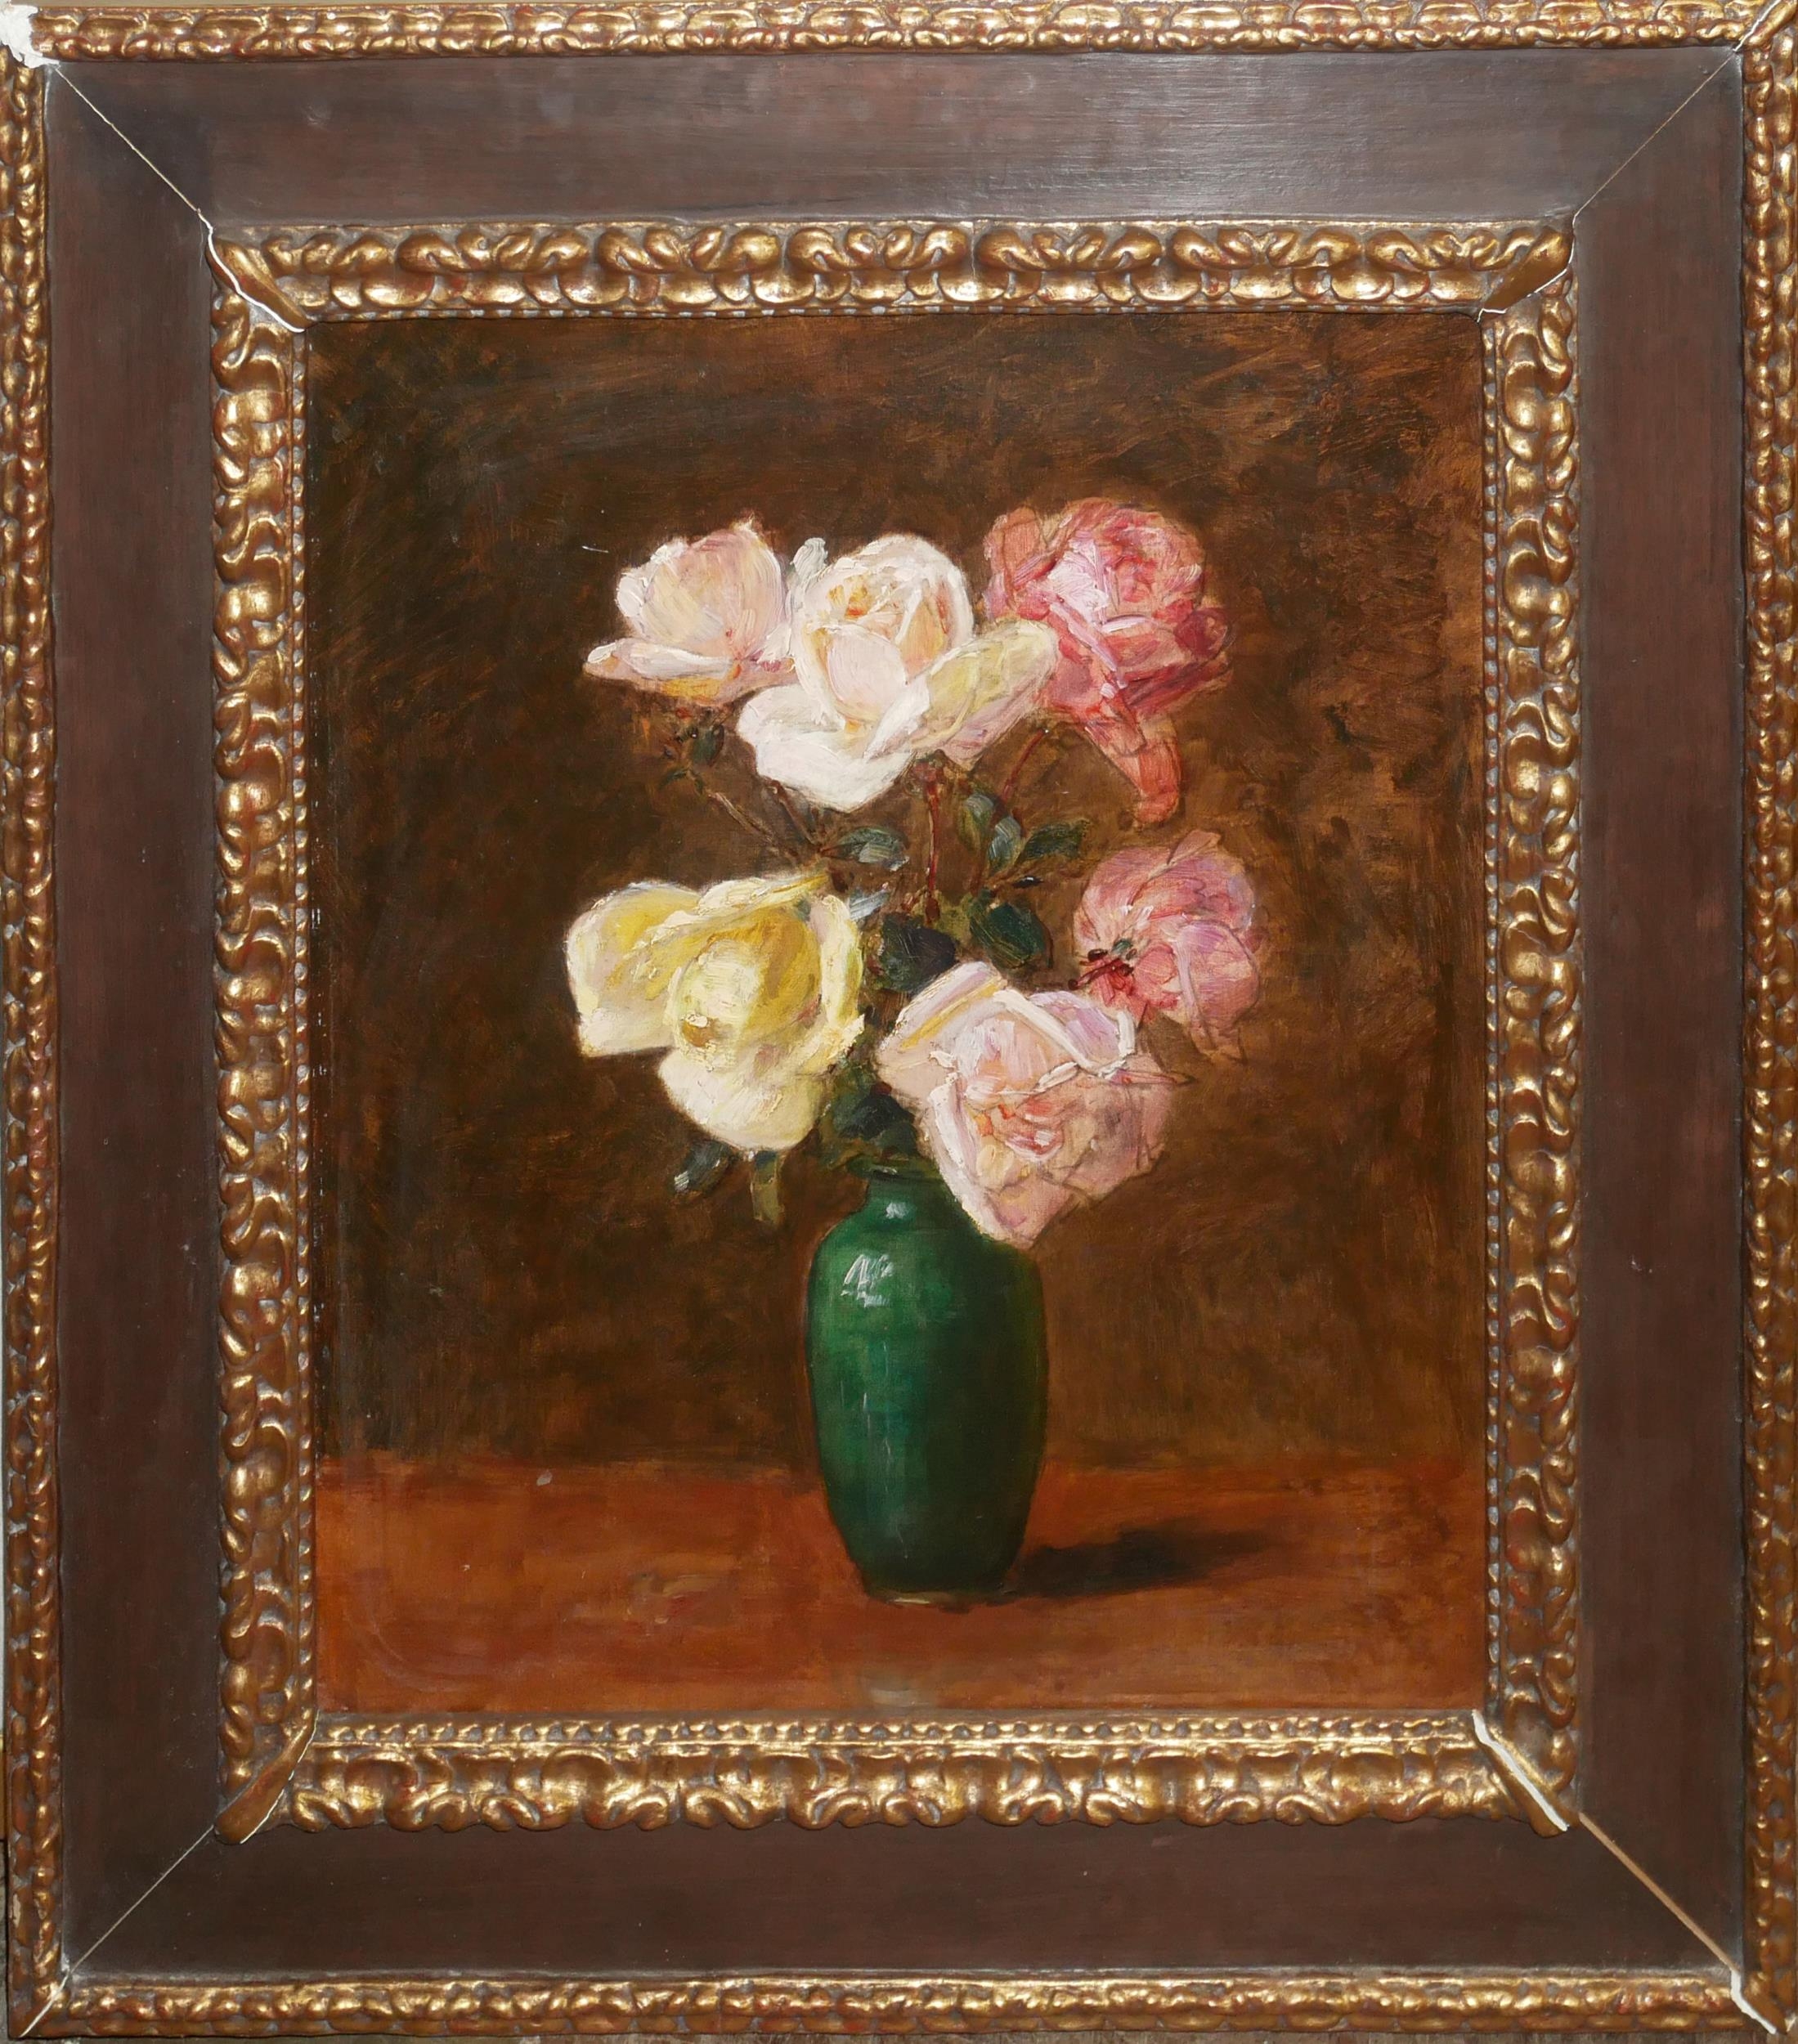 ATT: HENRI-THEODORE FANTIN LATOUR, 1836 - 1904, OIL ON CANVAS Still life, flowers, canvas by the - Image 2 of 4